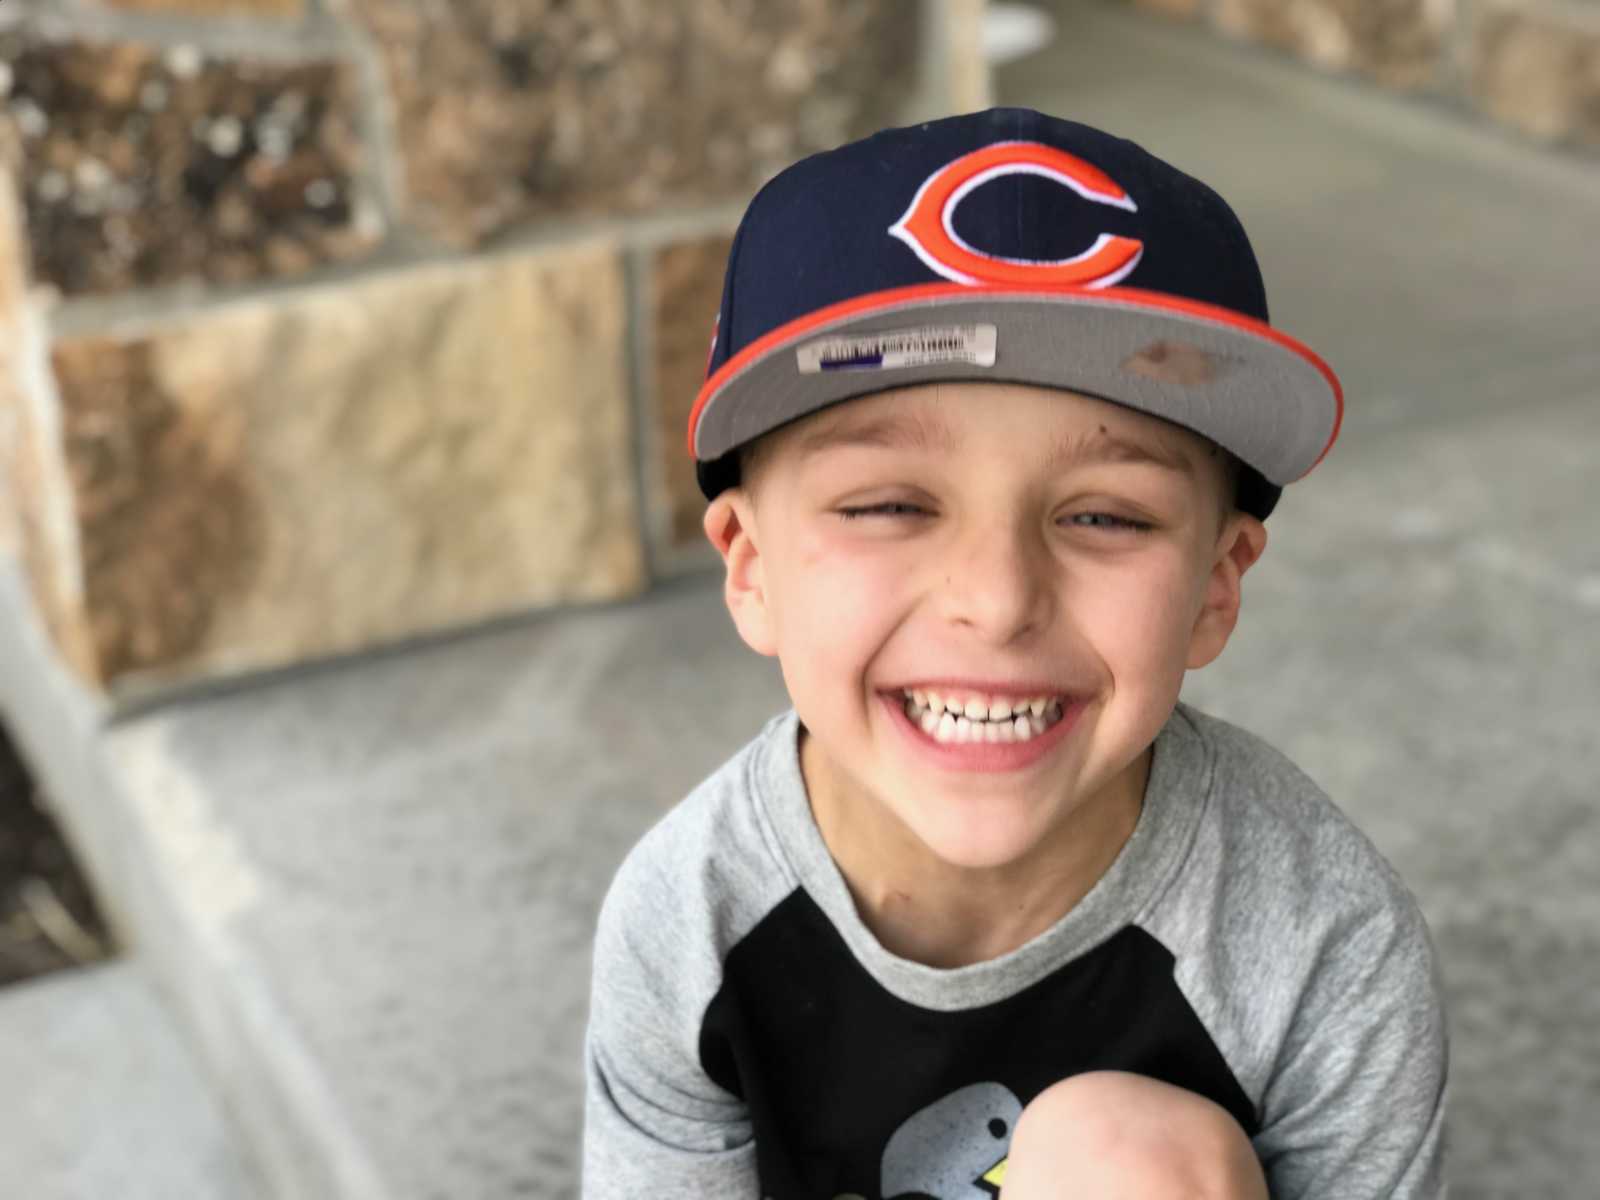 Little boy smiling while sitting in Chicago Bears hat who will have leg tumors later in life